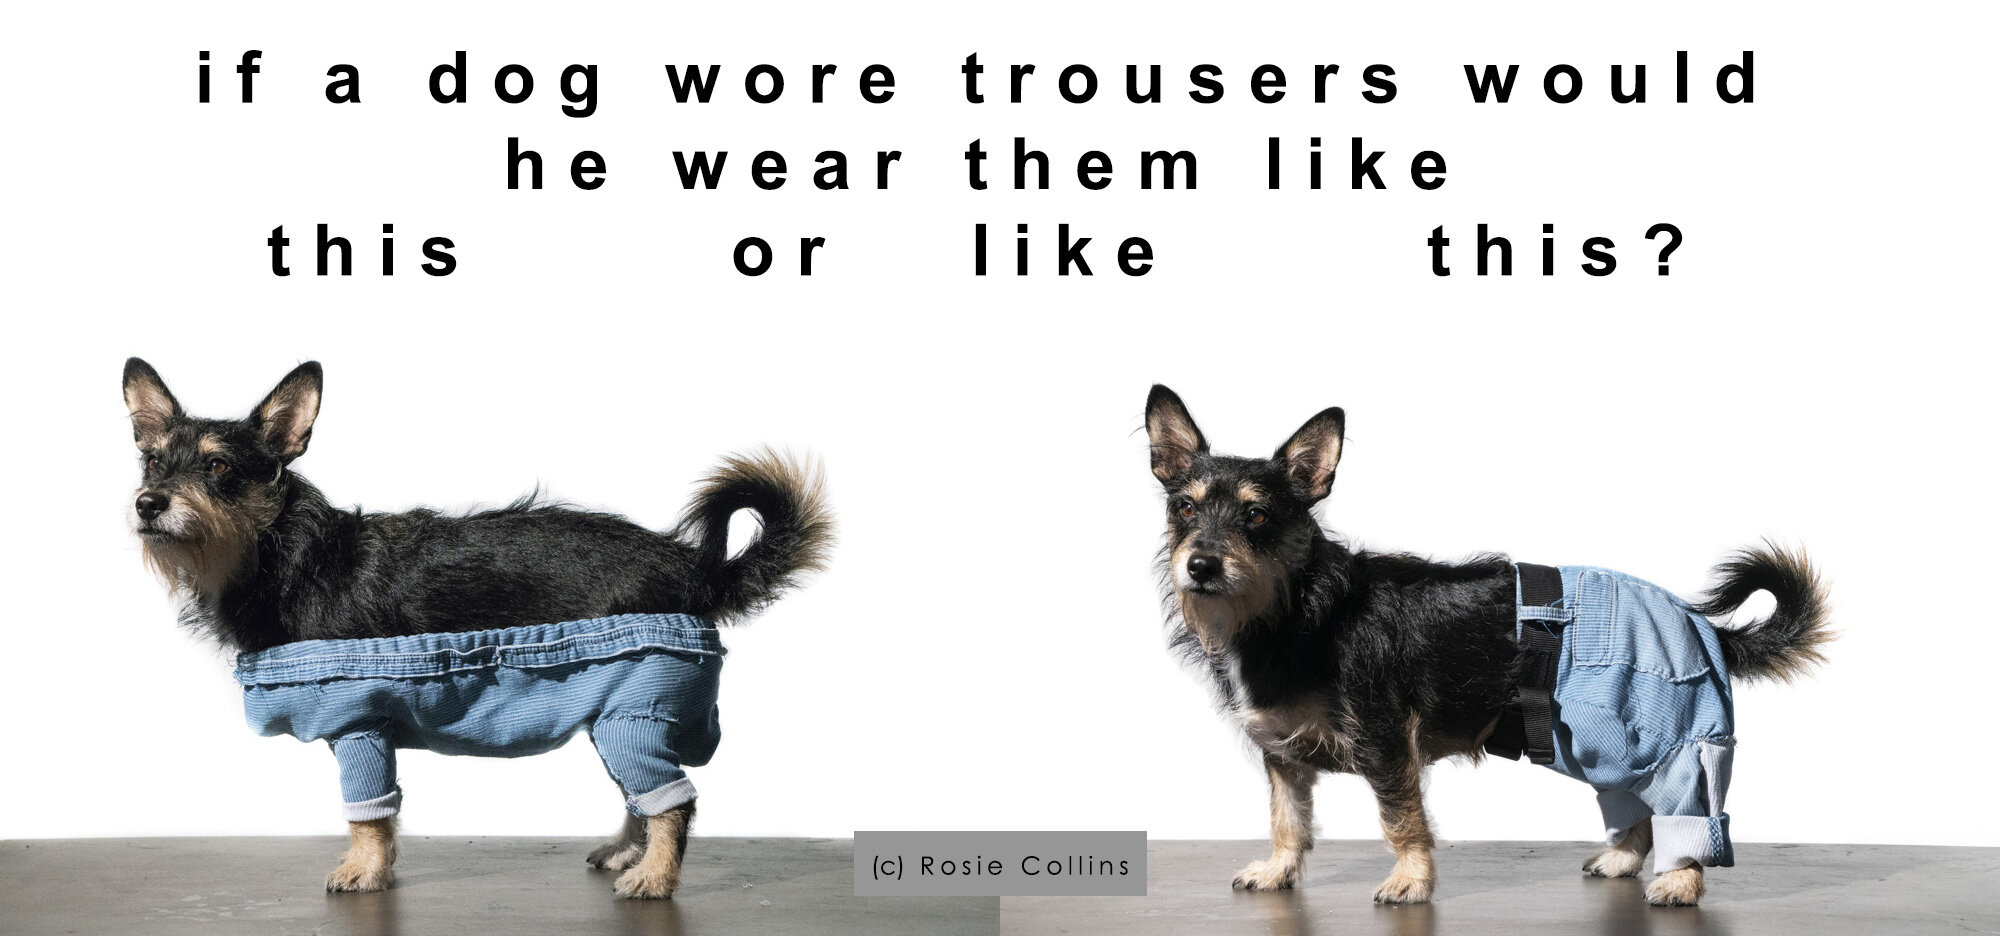 How do dogs wear trousers? — The Fred Company